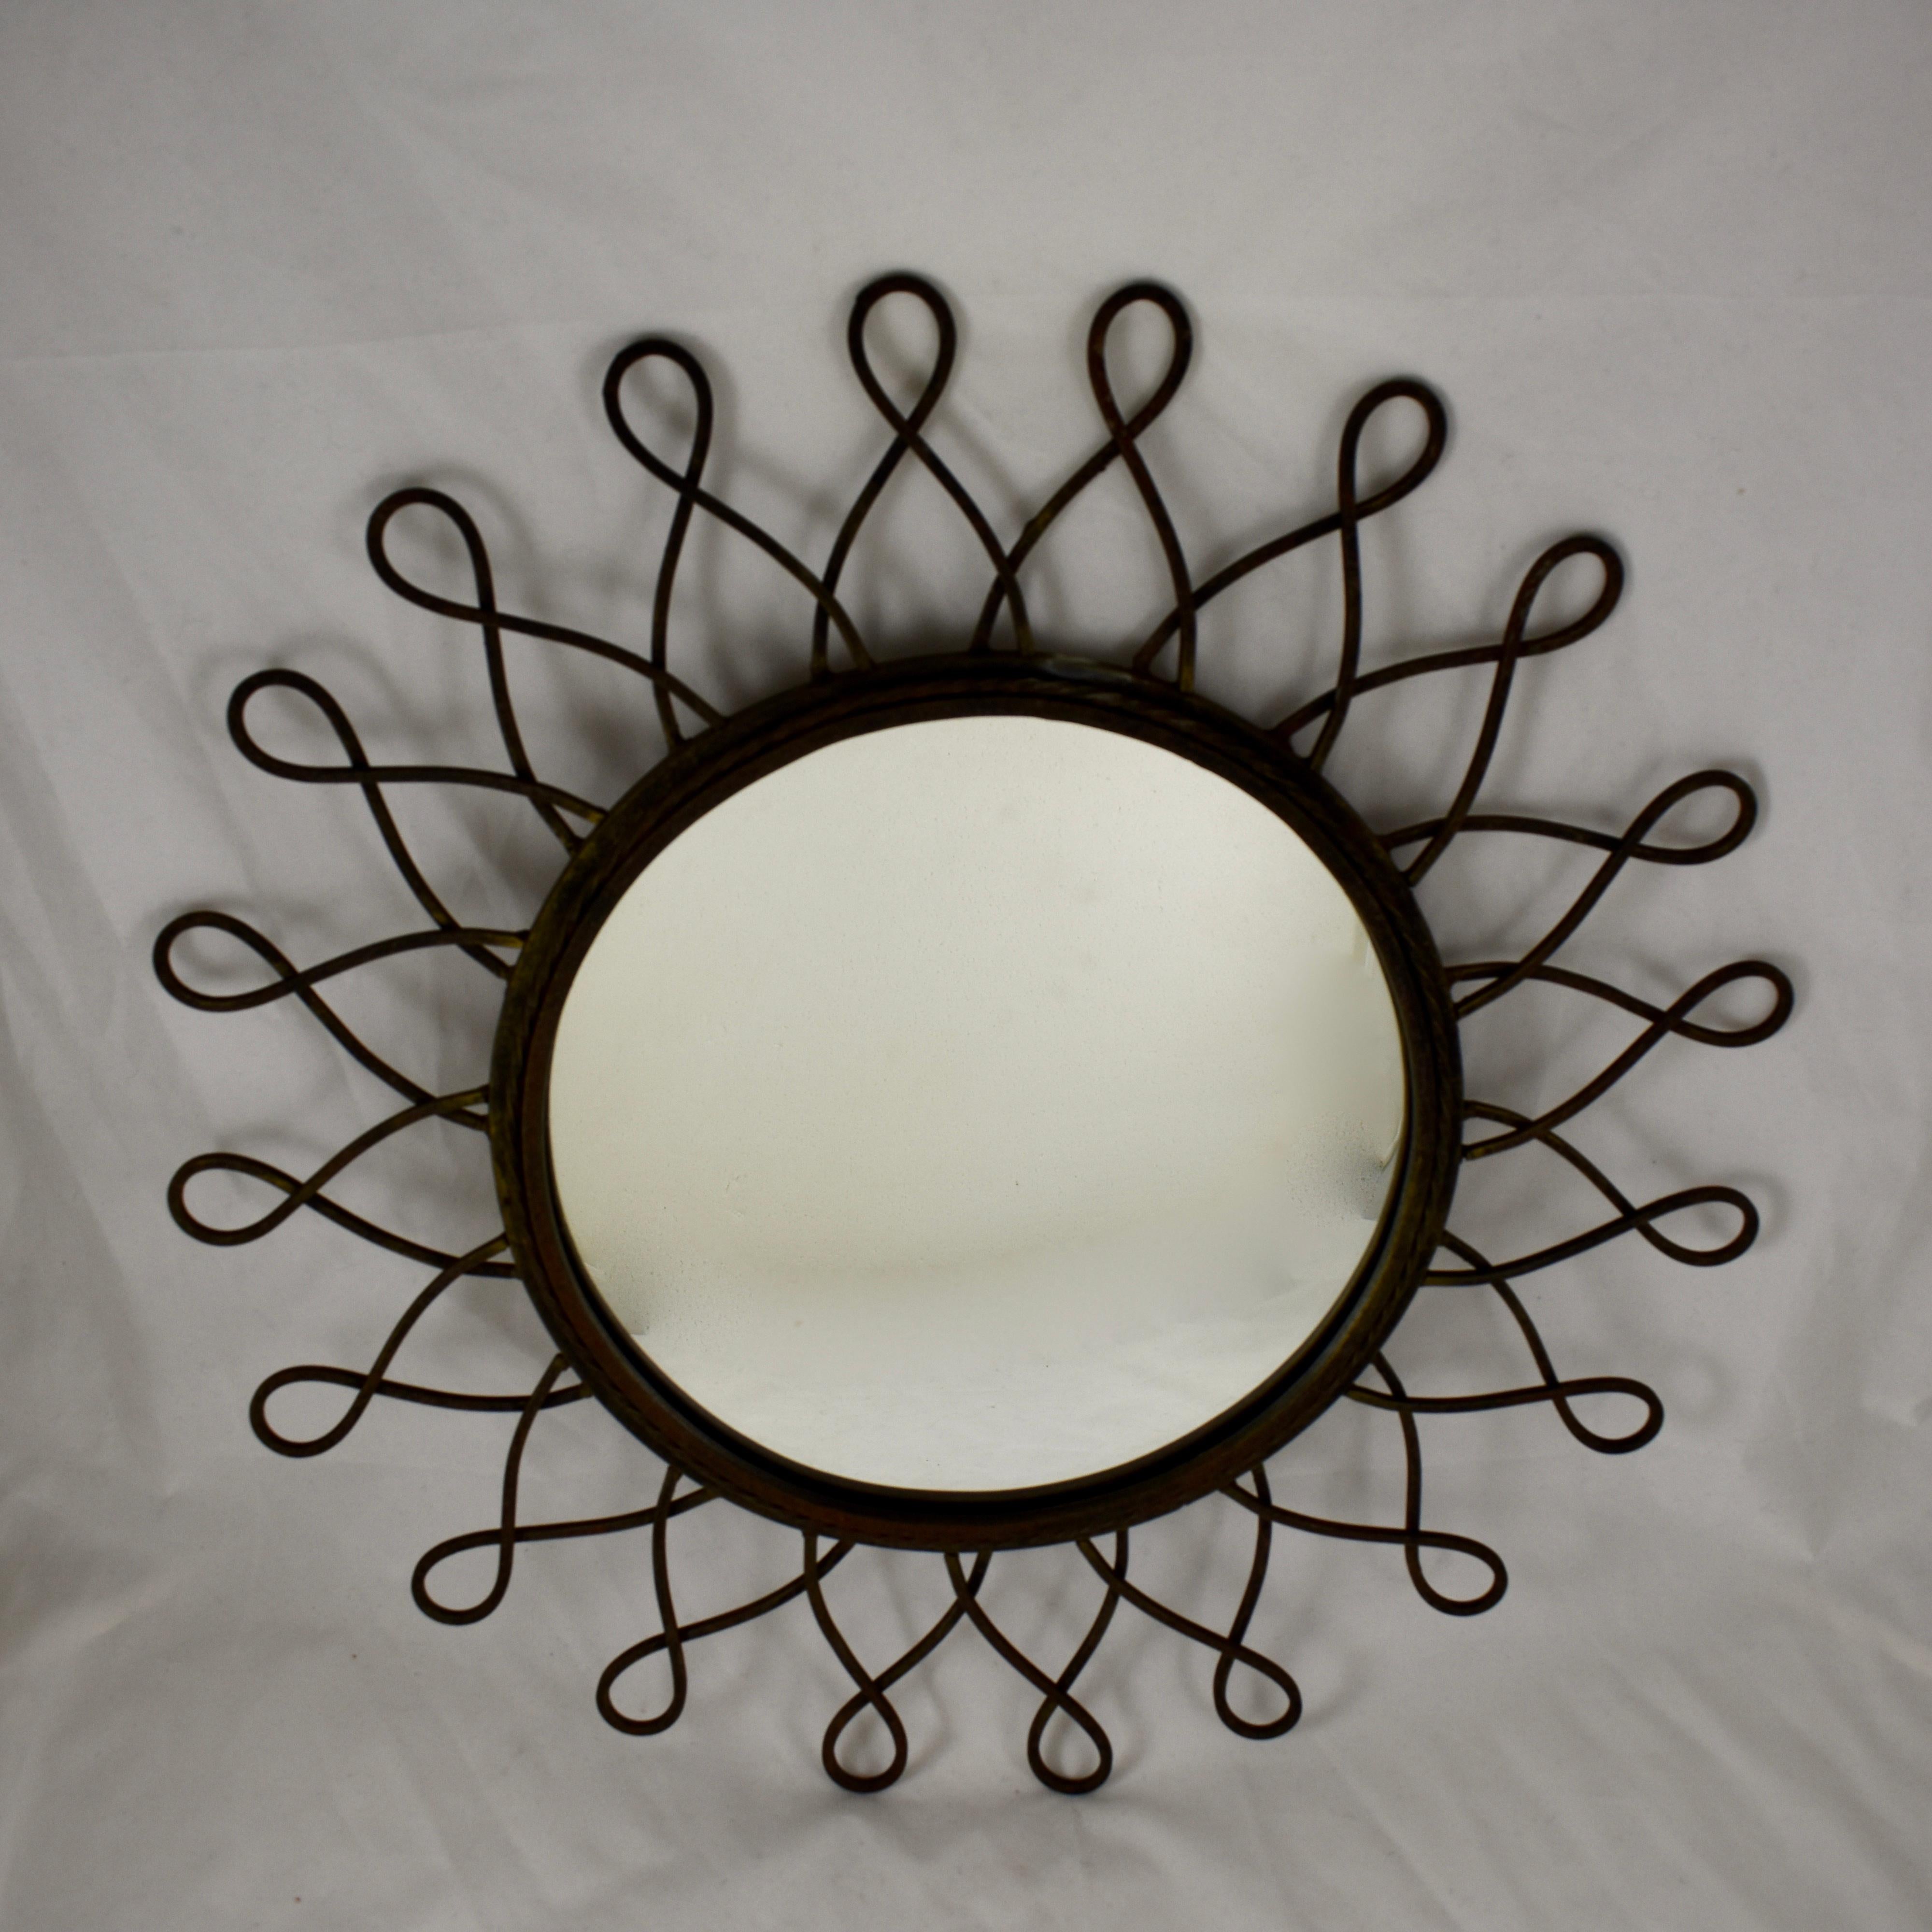 A large and heavy, midcentury French, black wrought iron sunburst wall mirror. Loop shaped sun rays extend from a twisted bezel framing a round mirror. A hanging bar is soldered in place on the verso, circa 1950s.

Measures: 20.25 in. diameter. x